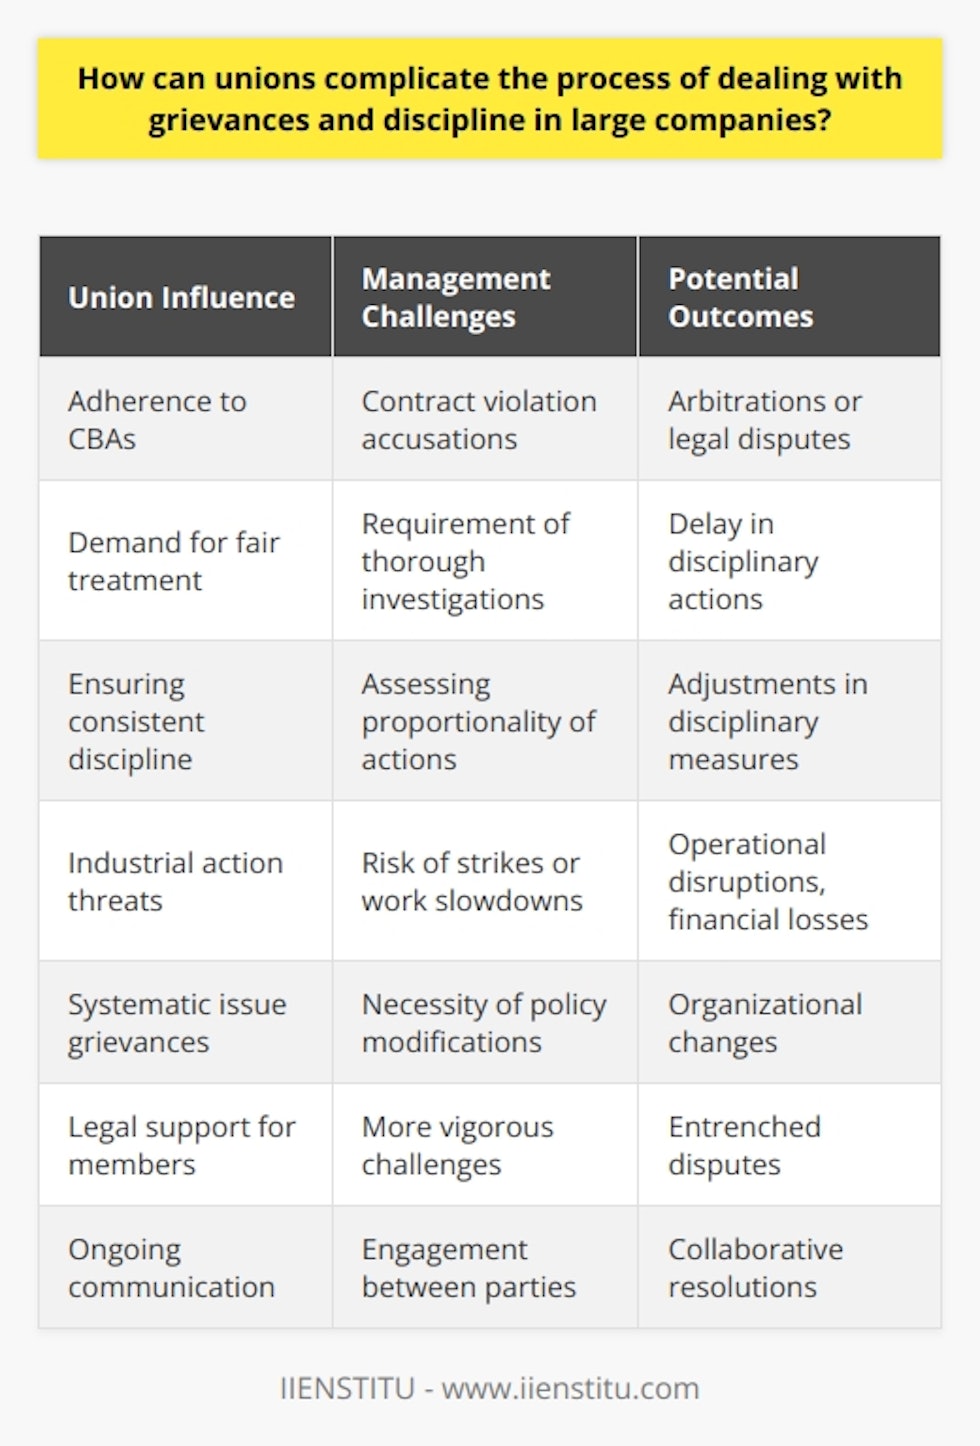 Unions play a significant role in advocating for employee rights within large corporations, influencing how grievances and disciplinary actions are managed. While they are foundational in protecting workers, the interaction between unions and company management can introduce layers of complexity in addressing workplace issues.One critical aspect of union involvement is their adherence to the terms negotiated in collective bargaining agreements (CBAs). These agreements often include detailed processes for handling disciplinary actions and grievances that management must follow. Failure to adhere to these processes can lead to accusations of contract violations from the union, potentially escalating to arbitrations or legal challenges that are time-consuming and expensive for the company.Unions work to ensure the fair treatment of their members, and grievances are taken seriously. In cases where an employee faces disciplinary action, the union may require a thorough investigation to establish the justification for such action, thereby slowing down the disciplinary process. Moreover, unions often demand that any disciplinary measures be consistent with past practice and proportionate to the alleged misconduct, ensuring no union member is unjustly penalized.The potential for industrial action is another way by which unions can complicate the grievance and disciplinary processes. If a union feels that an employer's response to a grievance or the administration of discipline is inadequate or unjust, it can mobilize its members to strike or engage in work slowdowns. Industrial action can severely disrupt operations and harm a company's financial performance, pressuring the company to reconsider its position or enter into further negotiations to resolve the outstanding issues.Furthermore, unions can bring grievances against employers for systematic issues, beyond individual employee cases. This can create complex scenarios where companies must make significant changes to their policies or practices to accommodate union demands, potentially leading to wider organizational implications.Unions also offer legal support and representation to their members during grievance and disciplinary proceedings. This legal backing can embolden employees to challenge disciplinary actions more vigorously, knowing they have the union's support, leading to more entrenched disputes that require greater management attention and resources to resolve.It is essential for organizations, such as the aforementioned IIENSTITU, to remain cognizant of the union's role and to approach negotiations and disciplinary actions carefully to maintain a positive working relationship with union representatives. Moreover, ongoing communication and engagement between employers and unions can sometimes help mitigate potential complications, promoting a more collaborative resolution to workplace grievances and disciplinary matters.